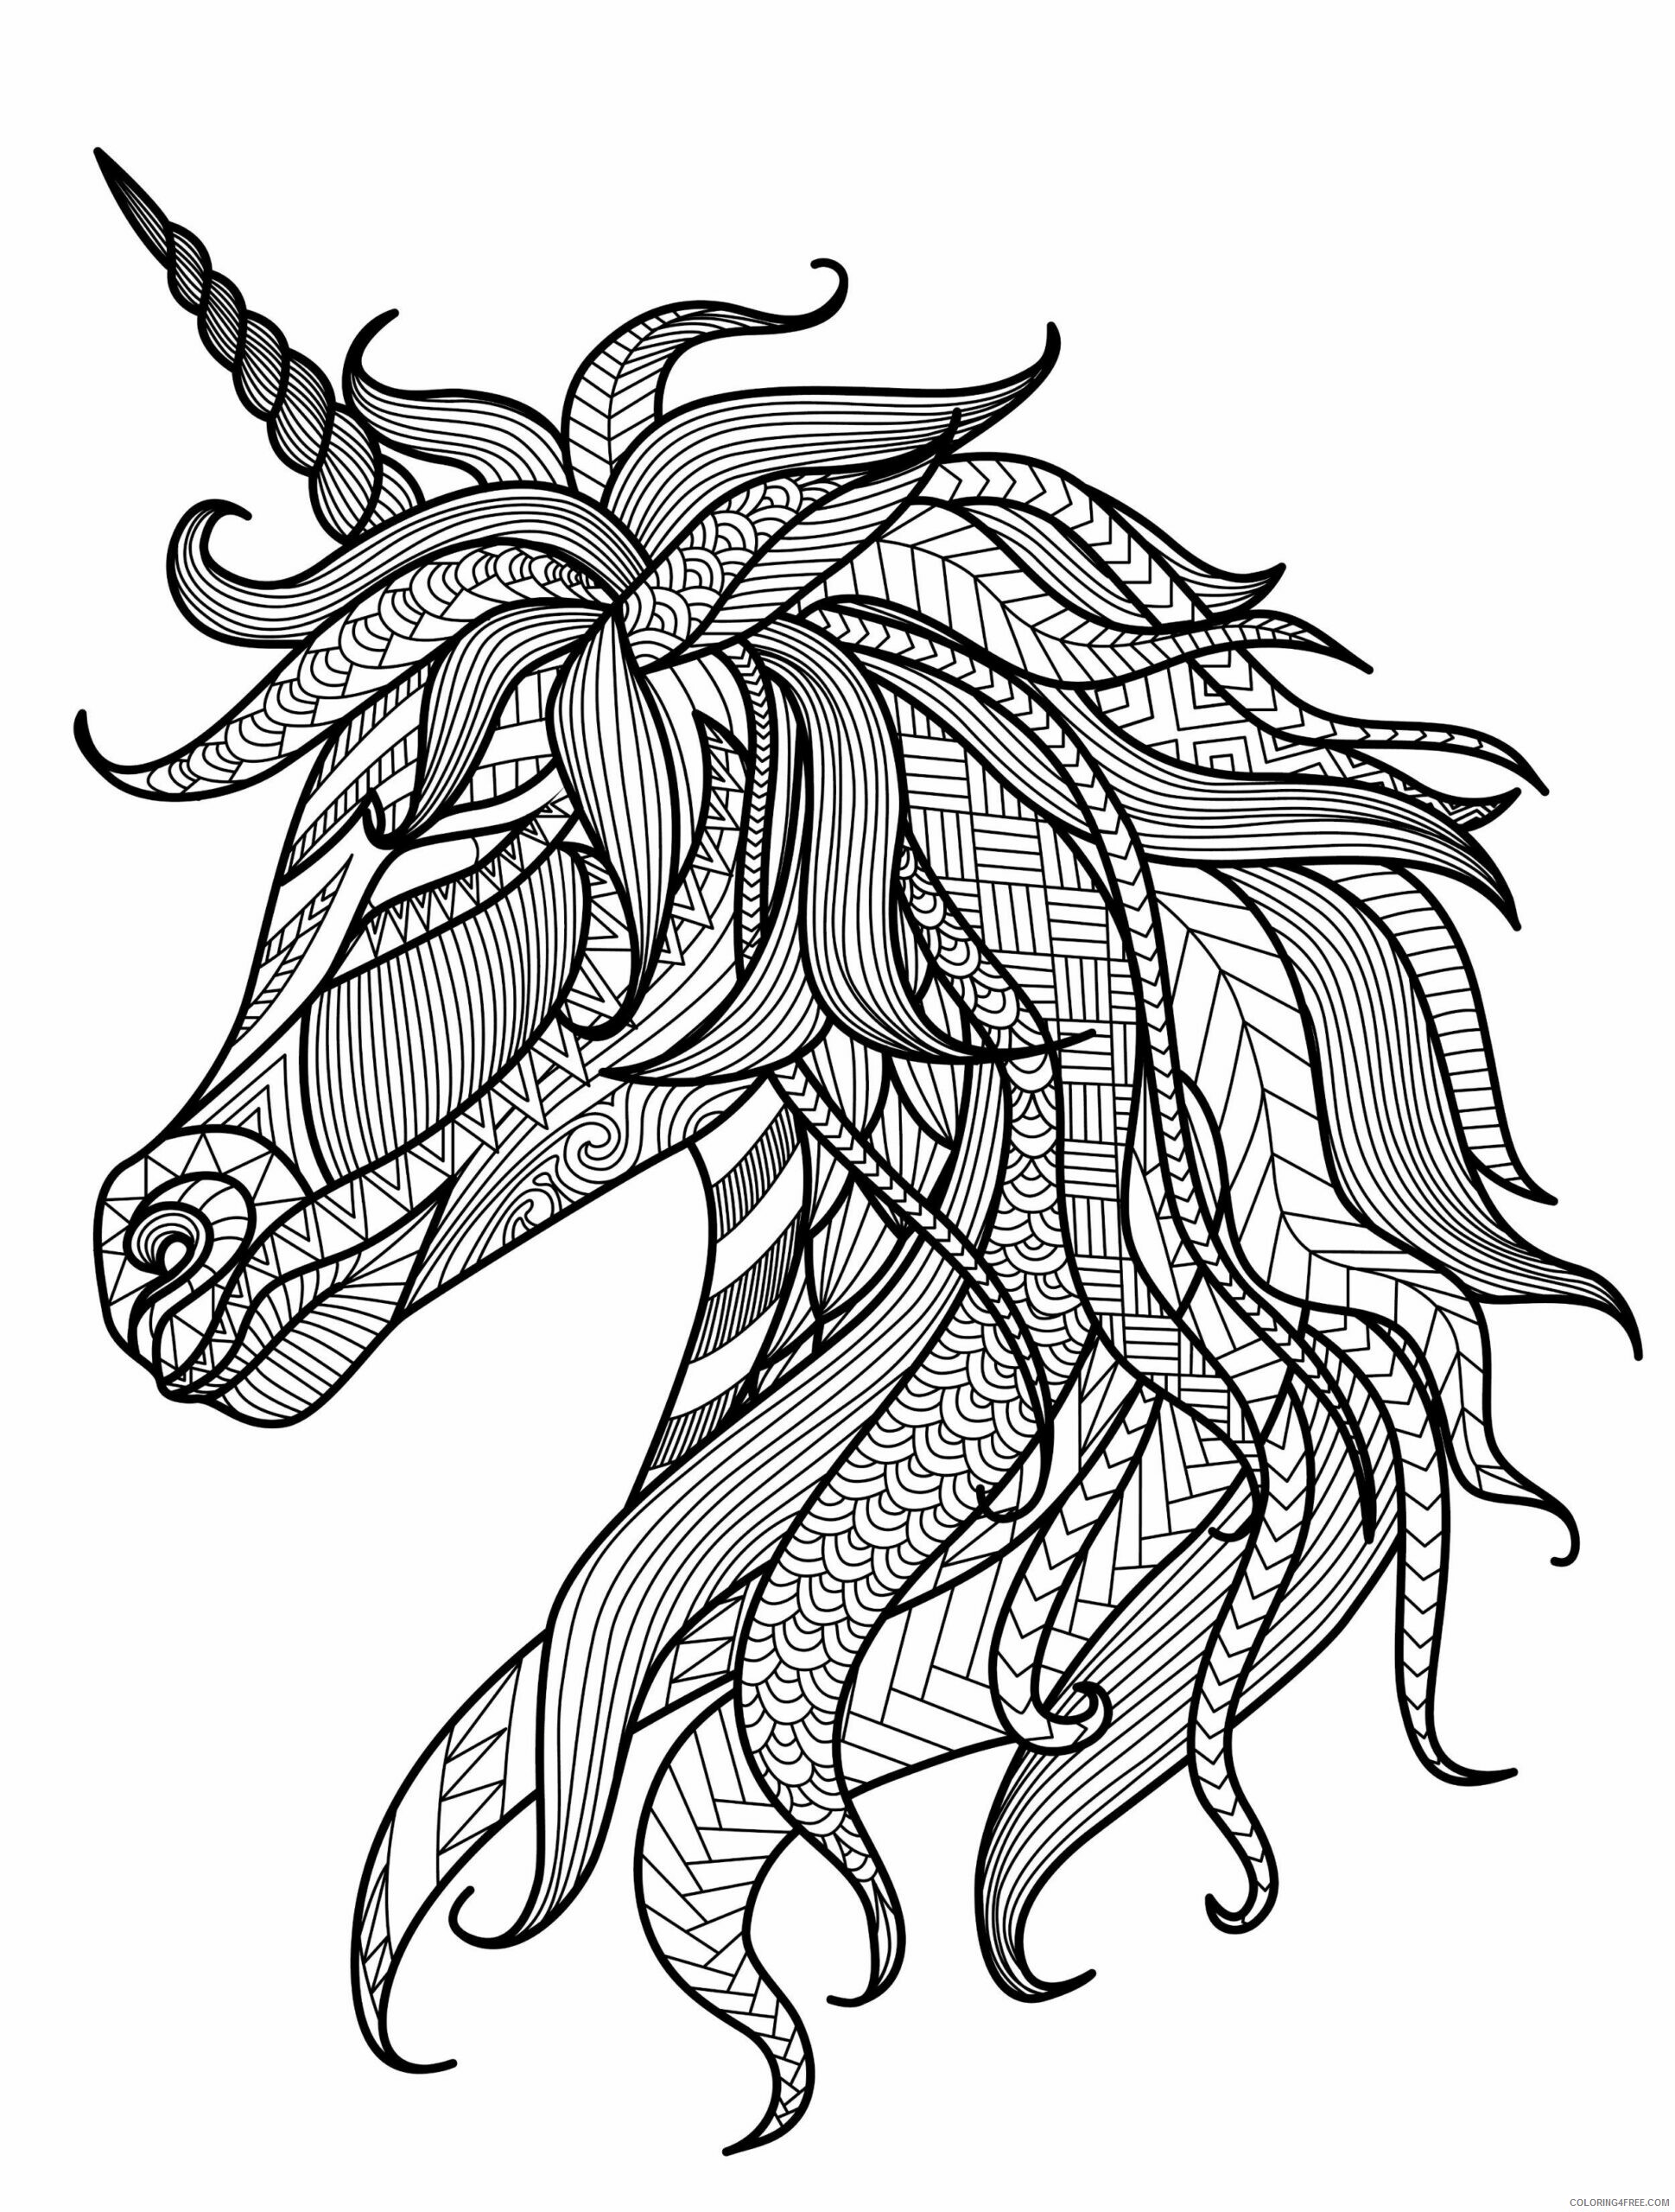 Adult Unicorn Coloring Pages Unicorn for Adults Printable 2021 0080 Coloring4free